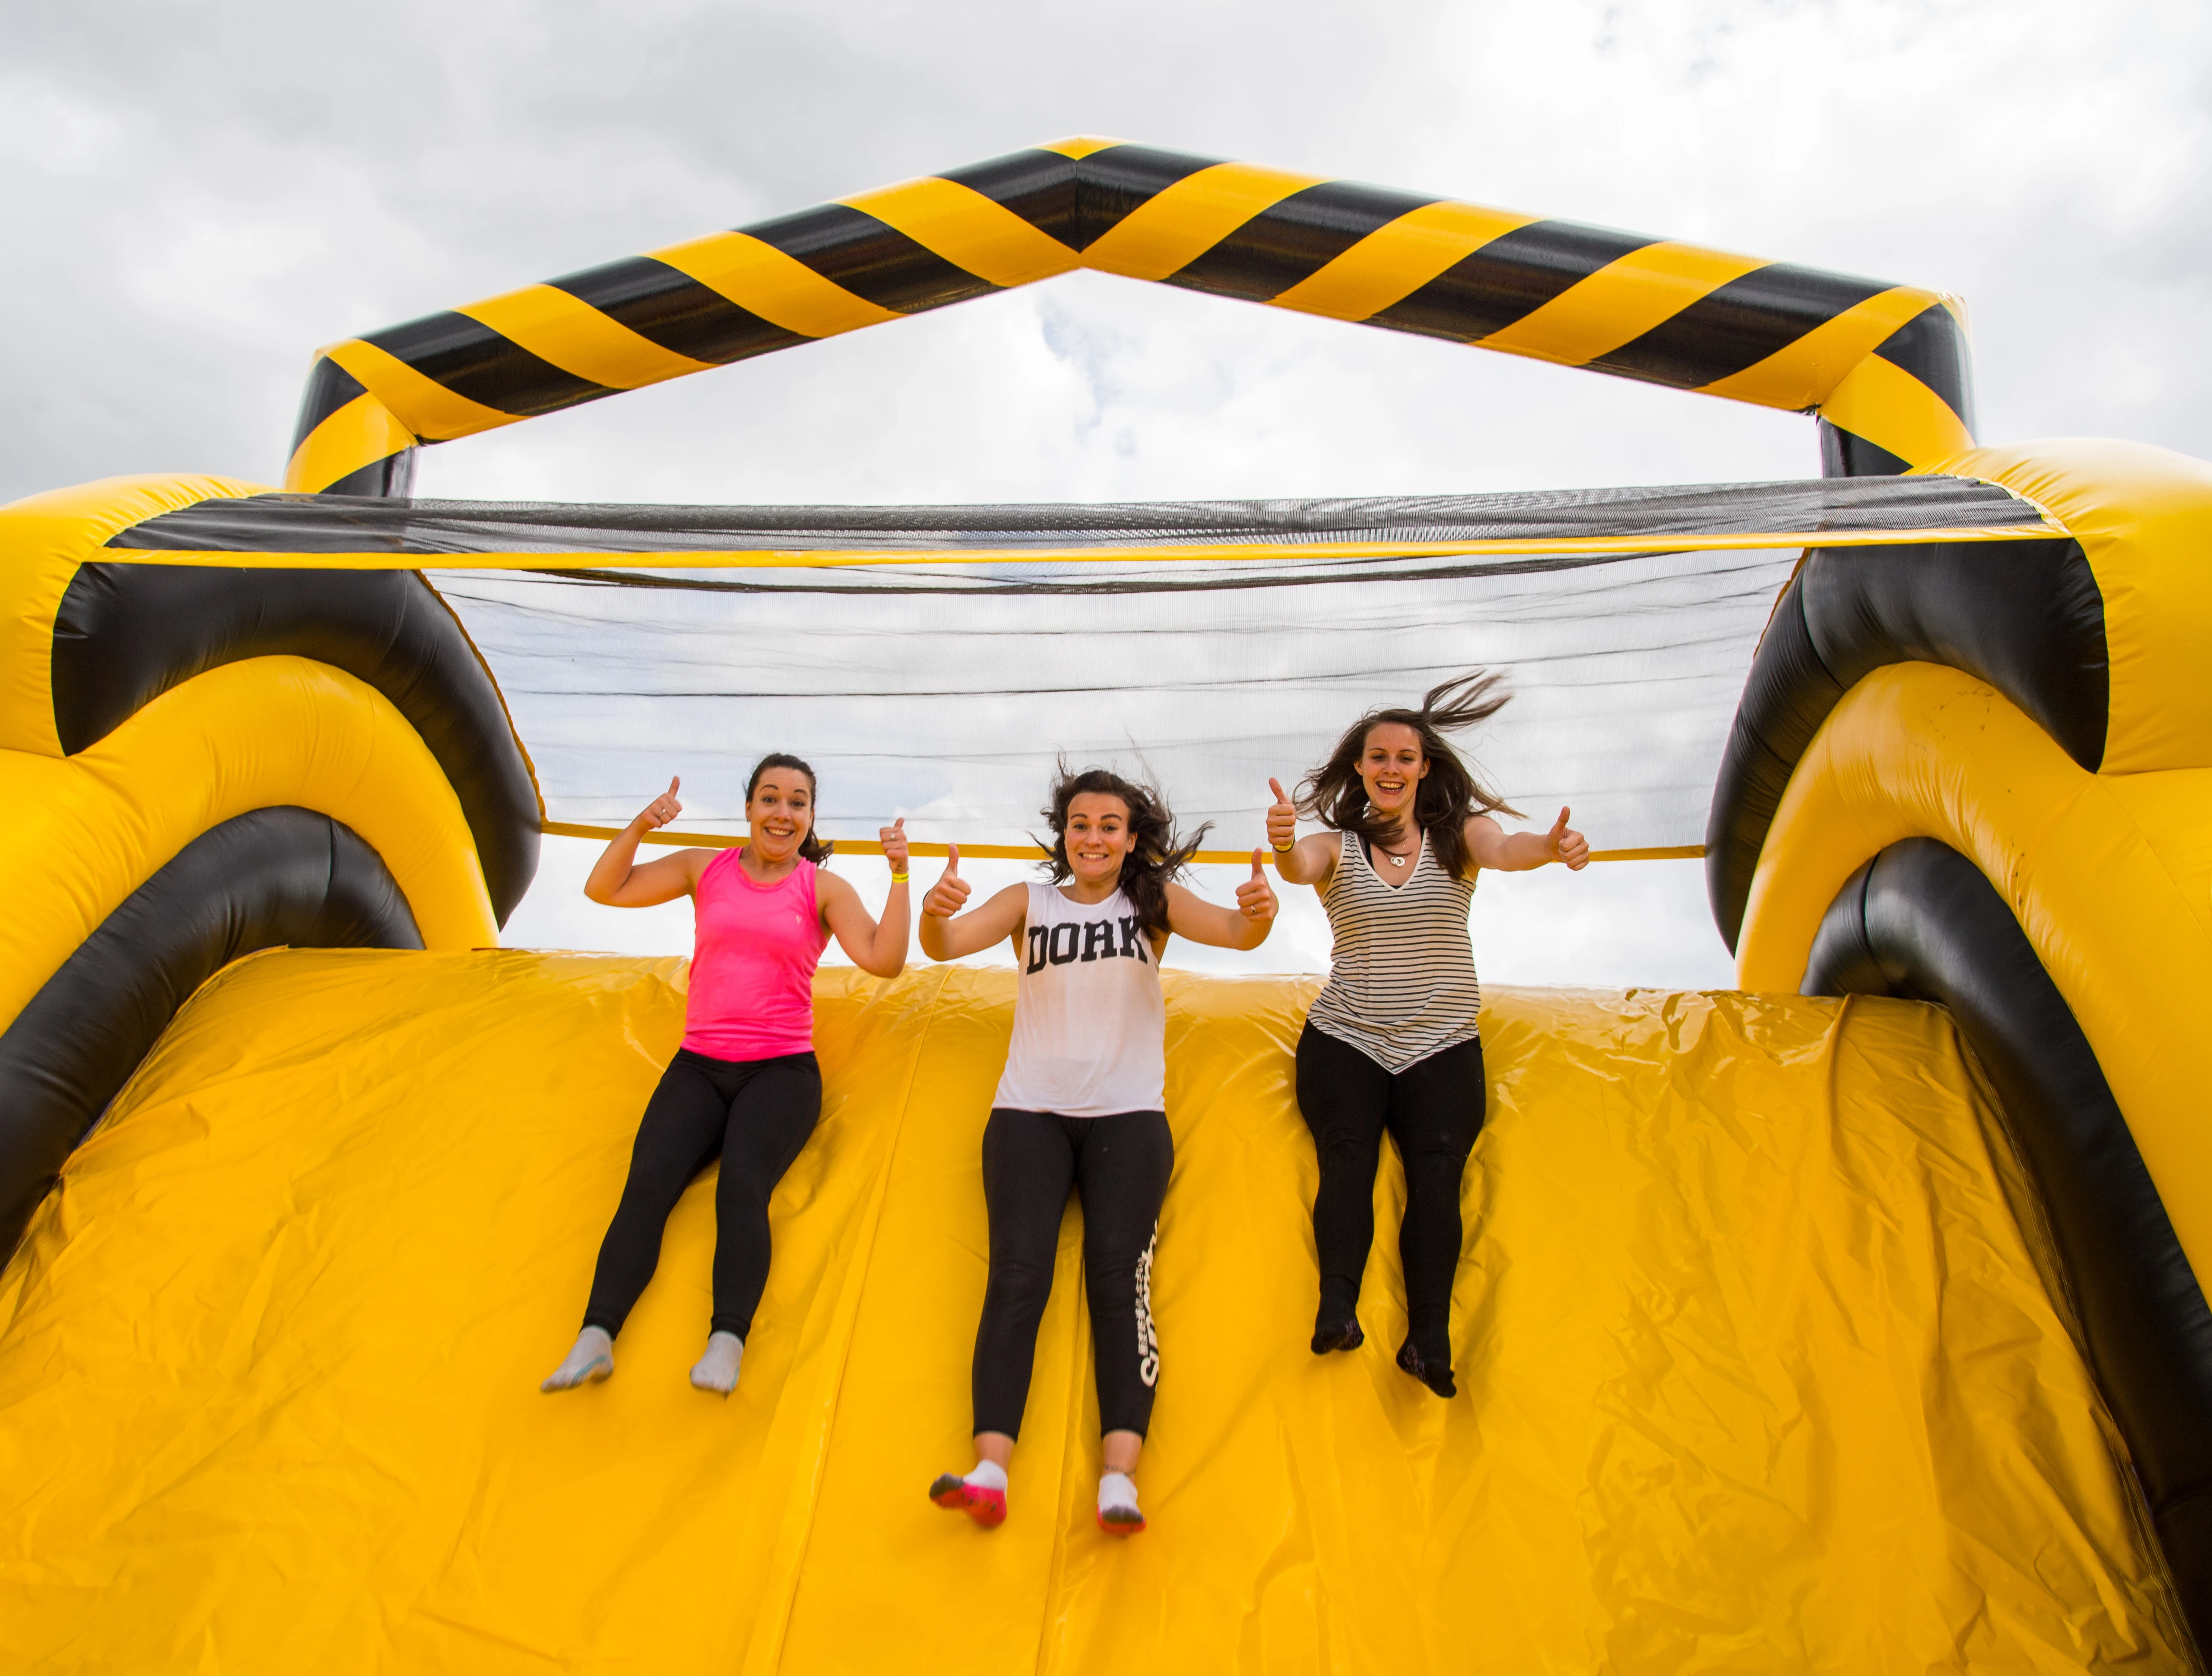 Berkshire-based Simply The Best Events has enjoyed a record year with 100,000 people visiting its nationwide touring attraction, The Labyrinth Challenge.